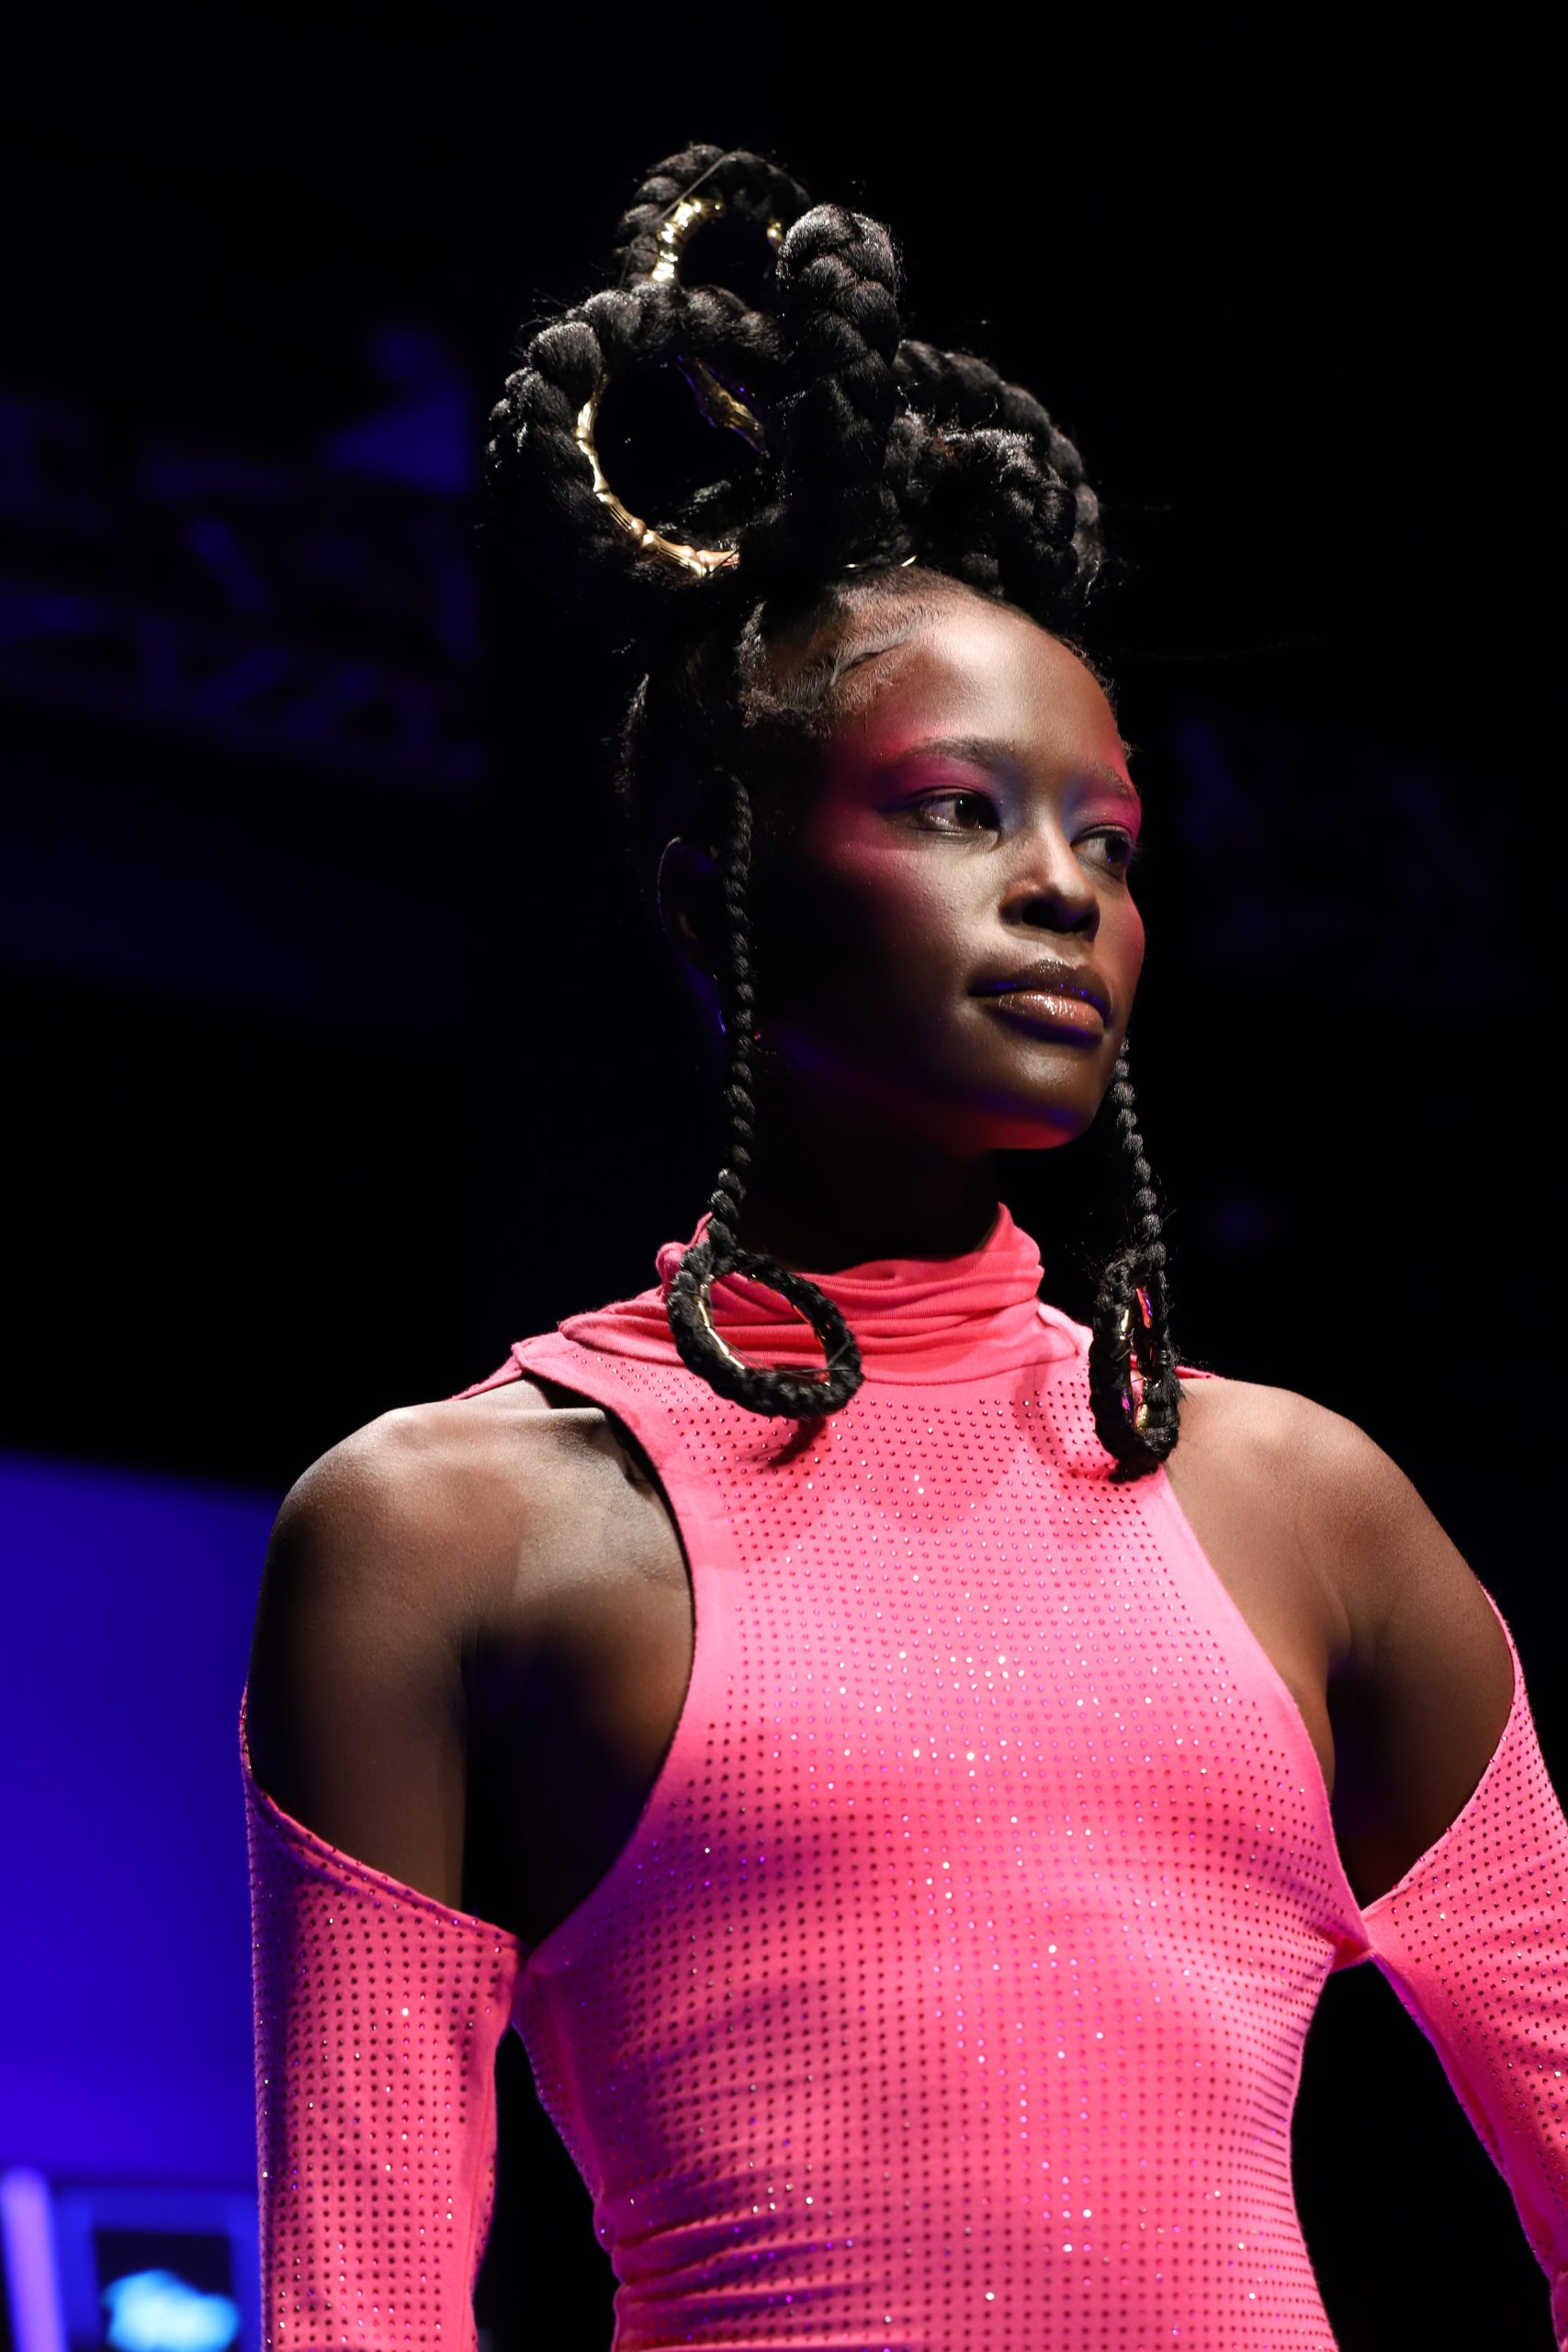 Texture On the Runway Brings Fashion to Beautycon